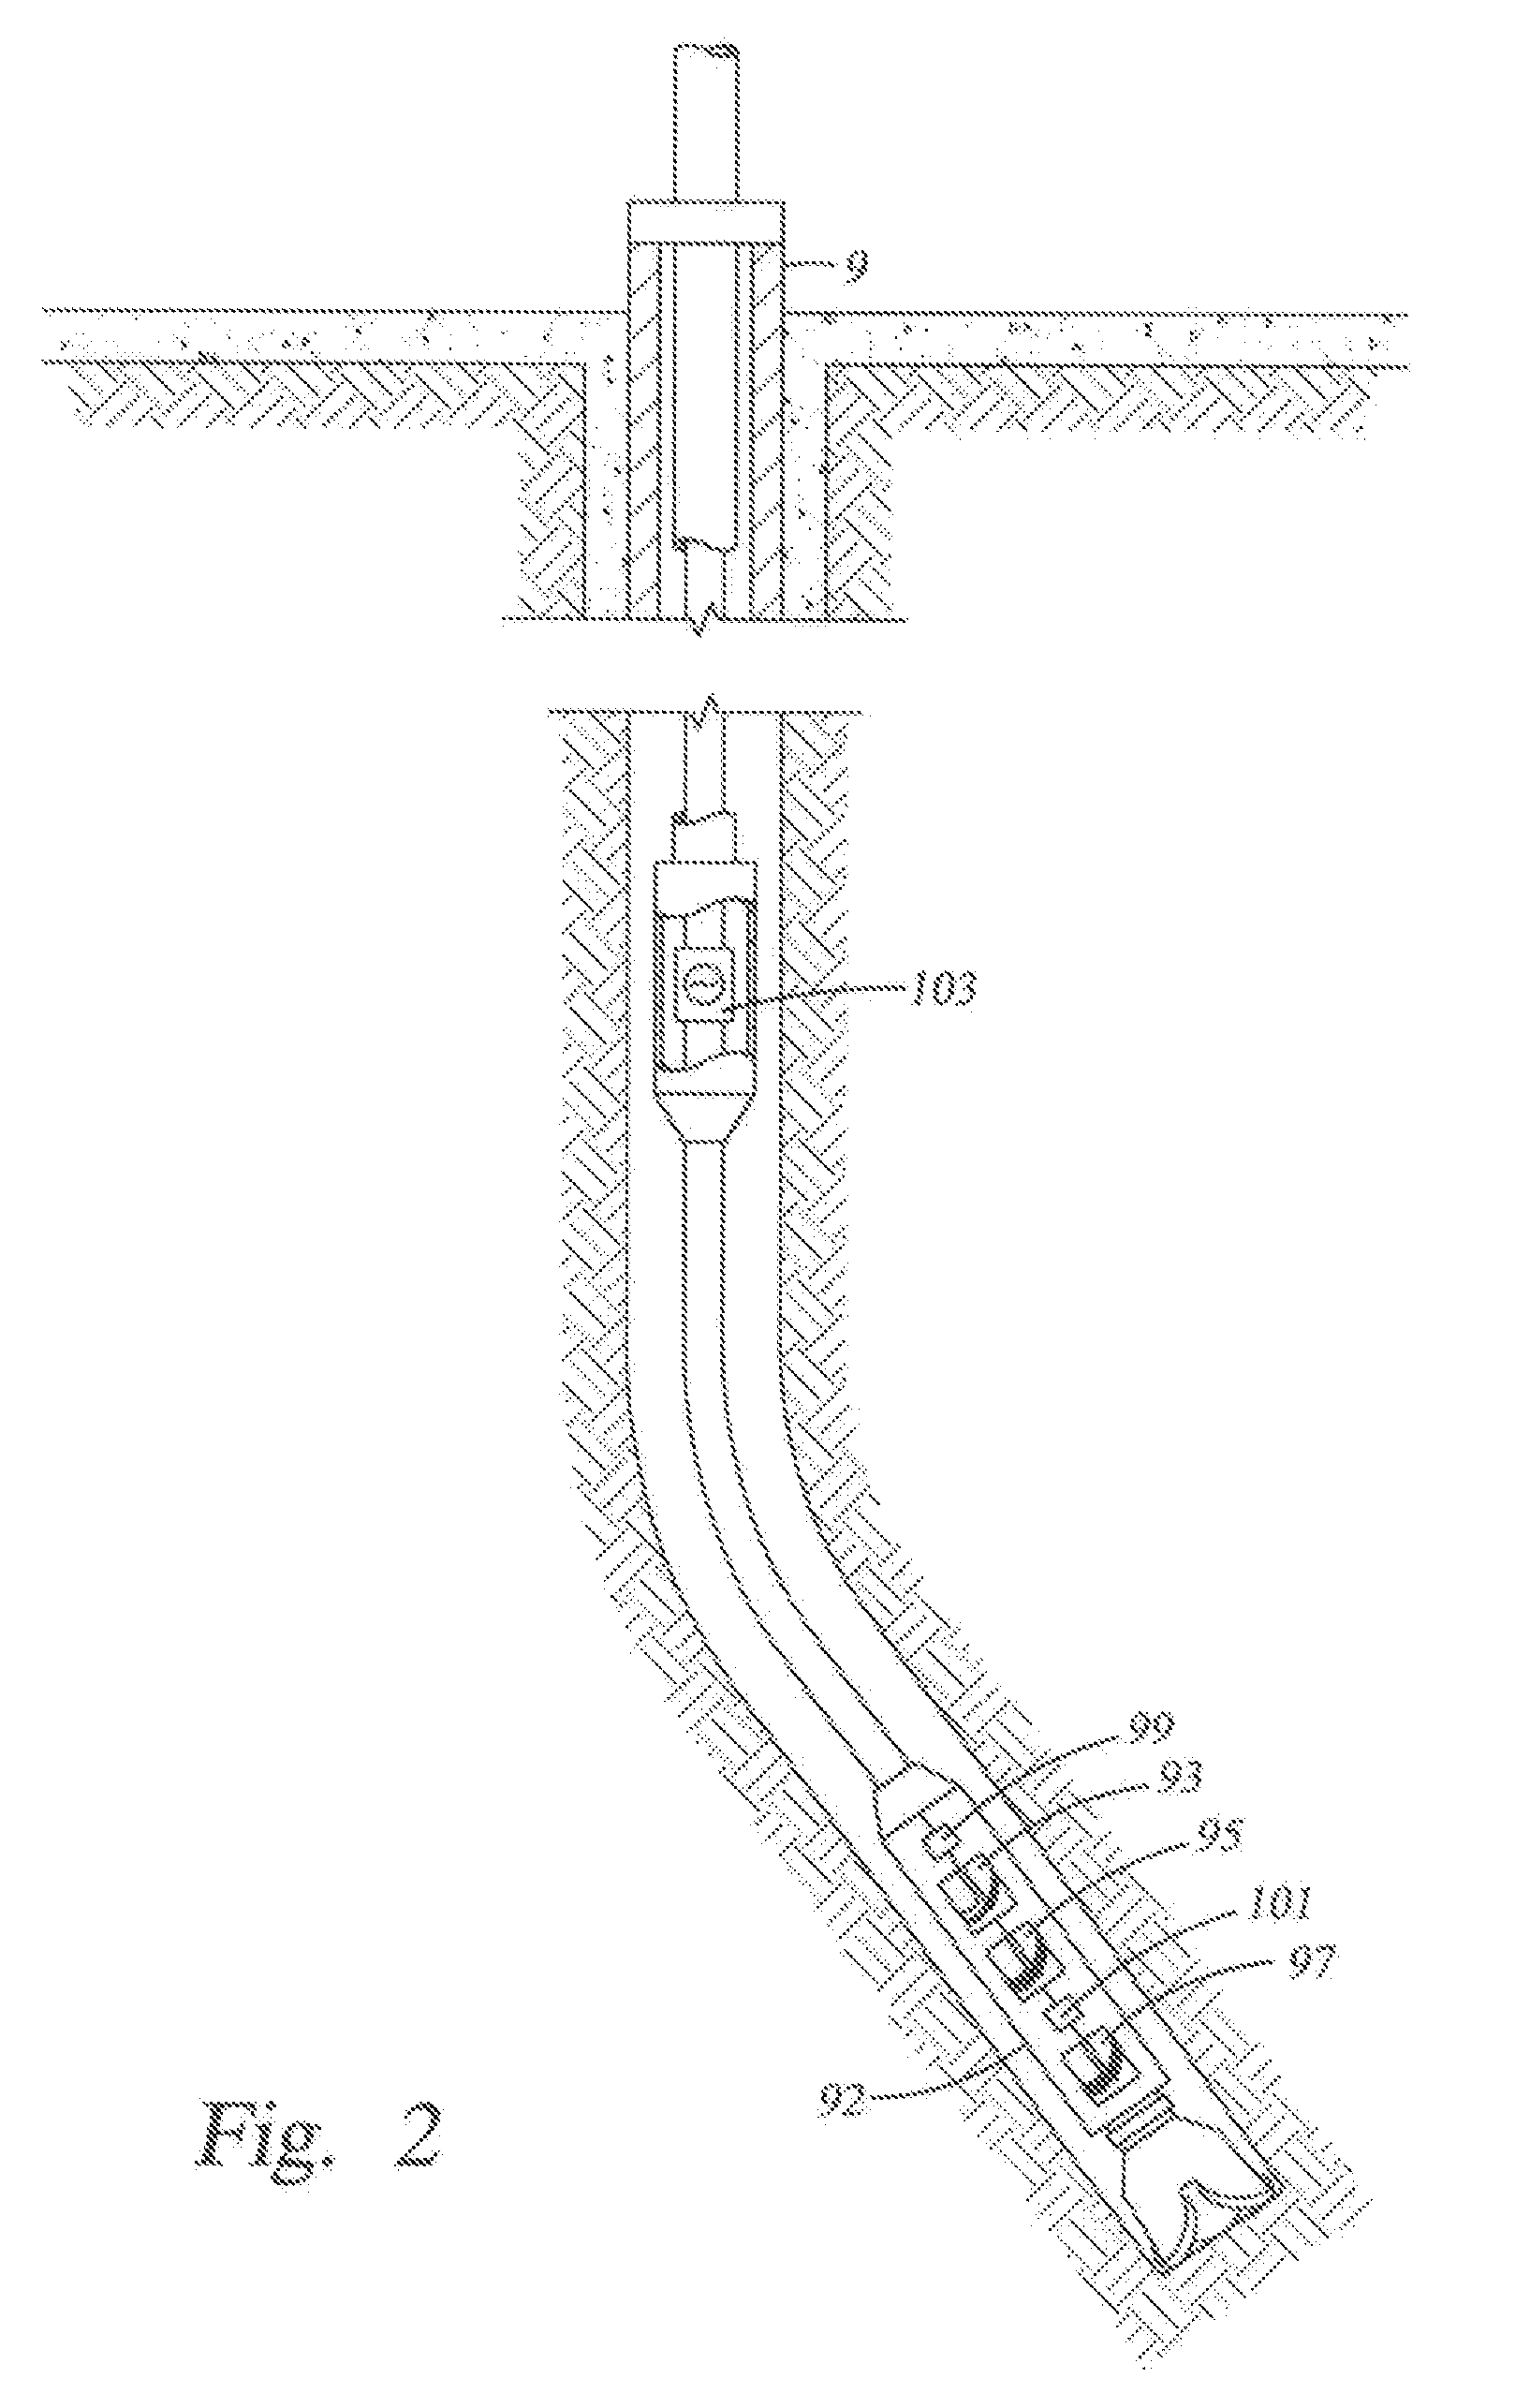 Flexible Circuit for Downhole Antenna